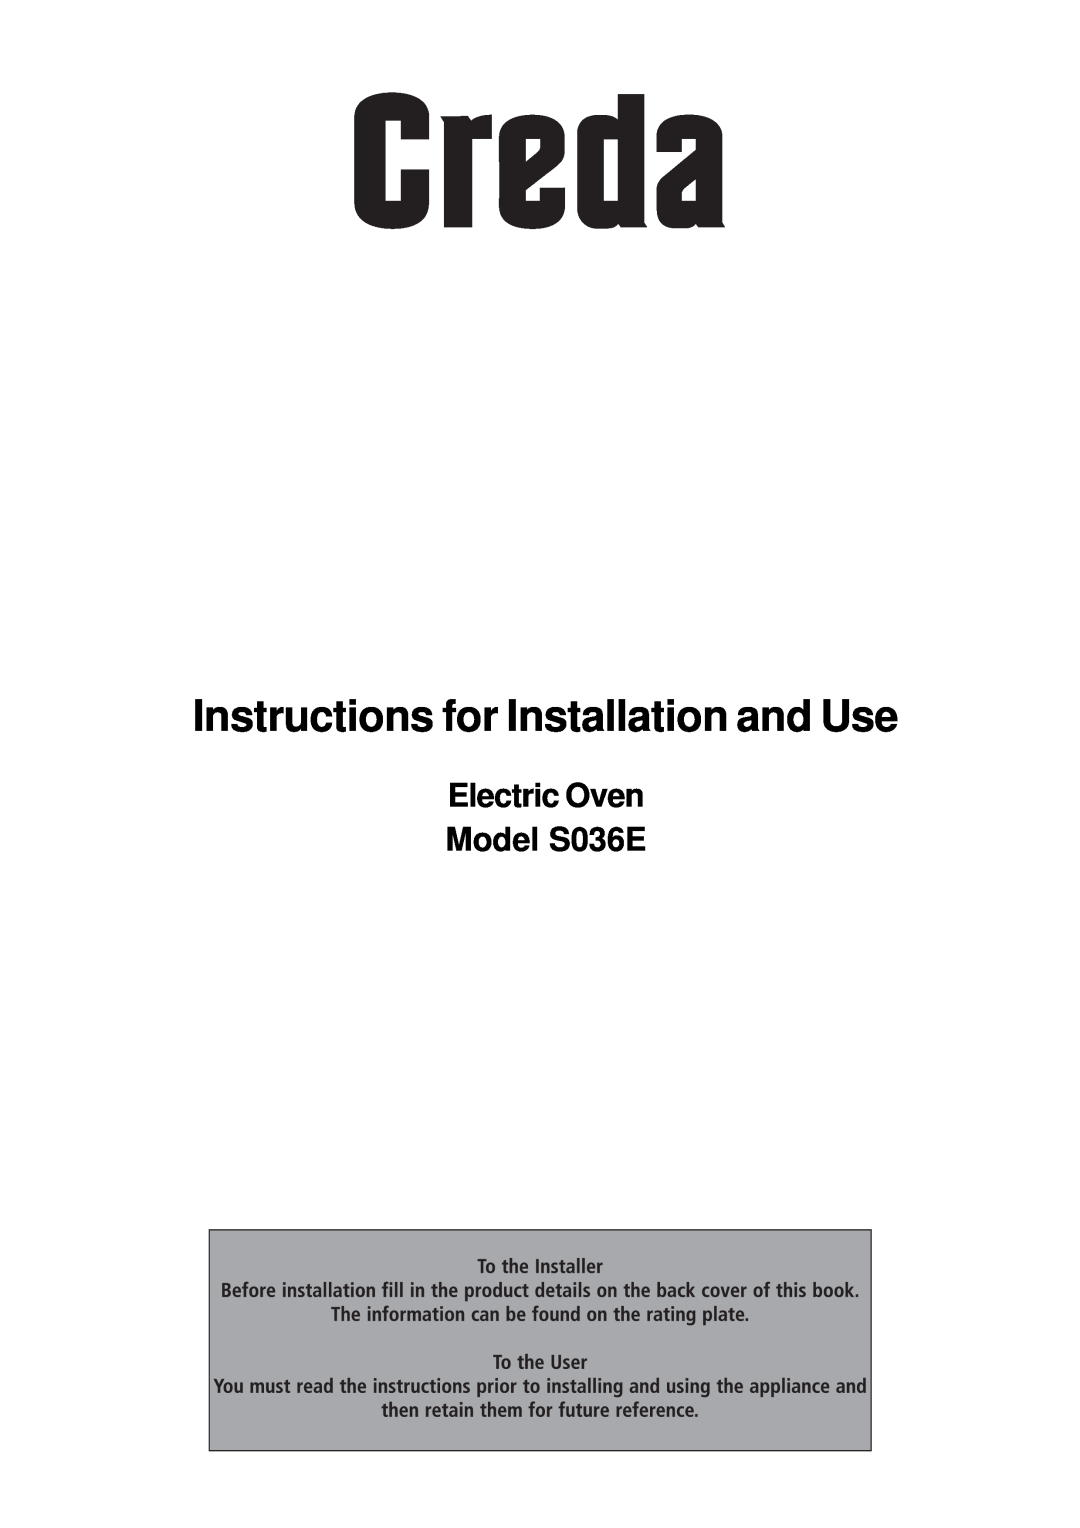 Creda manual Electric Oven Model S036E, Instructions for Installation and Use 